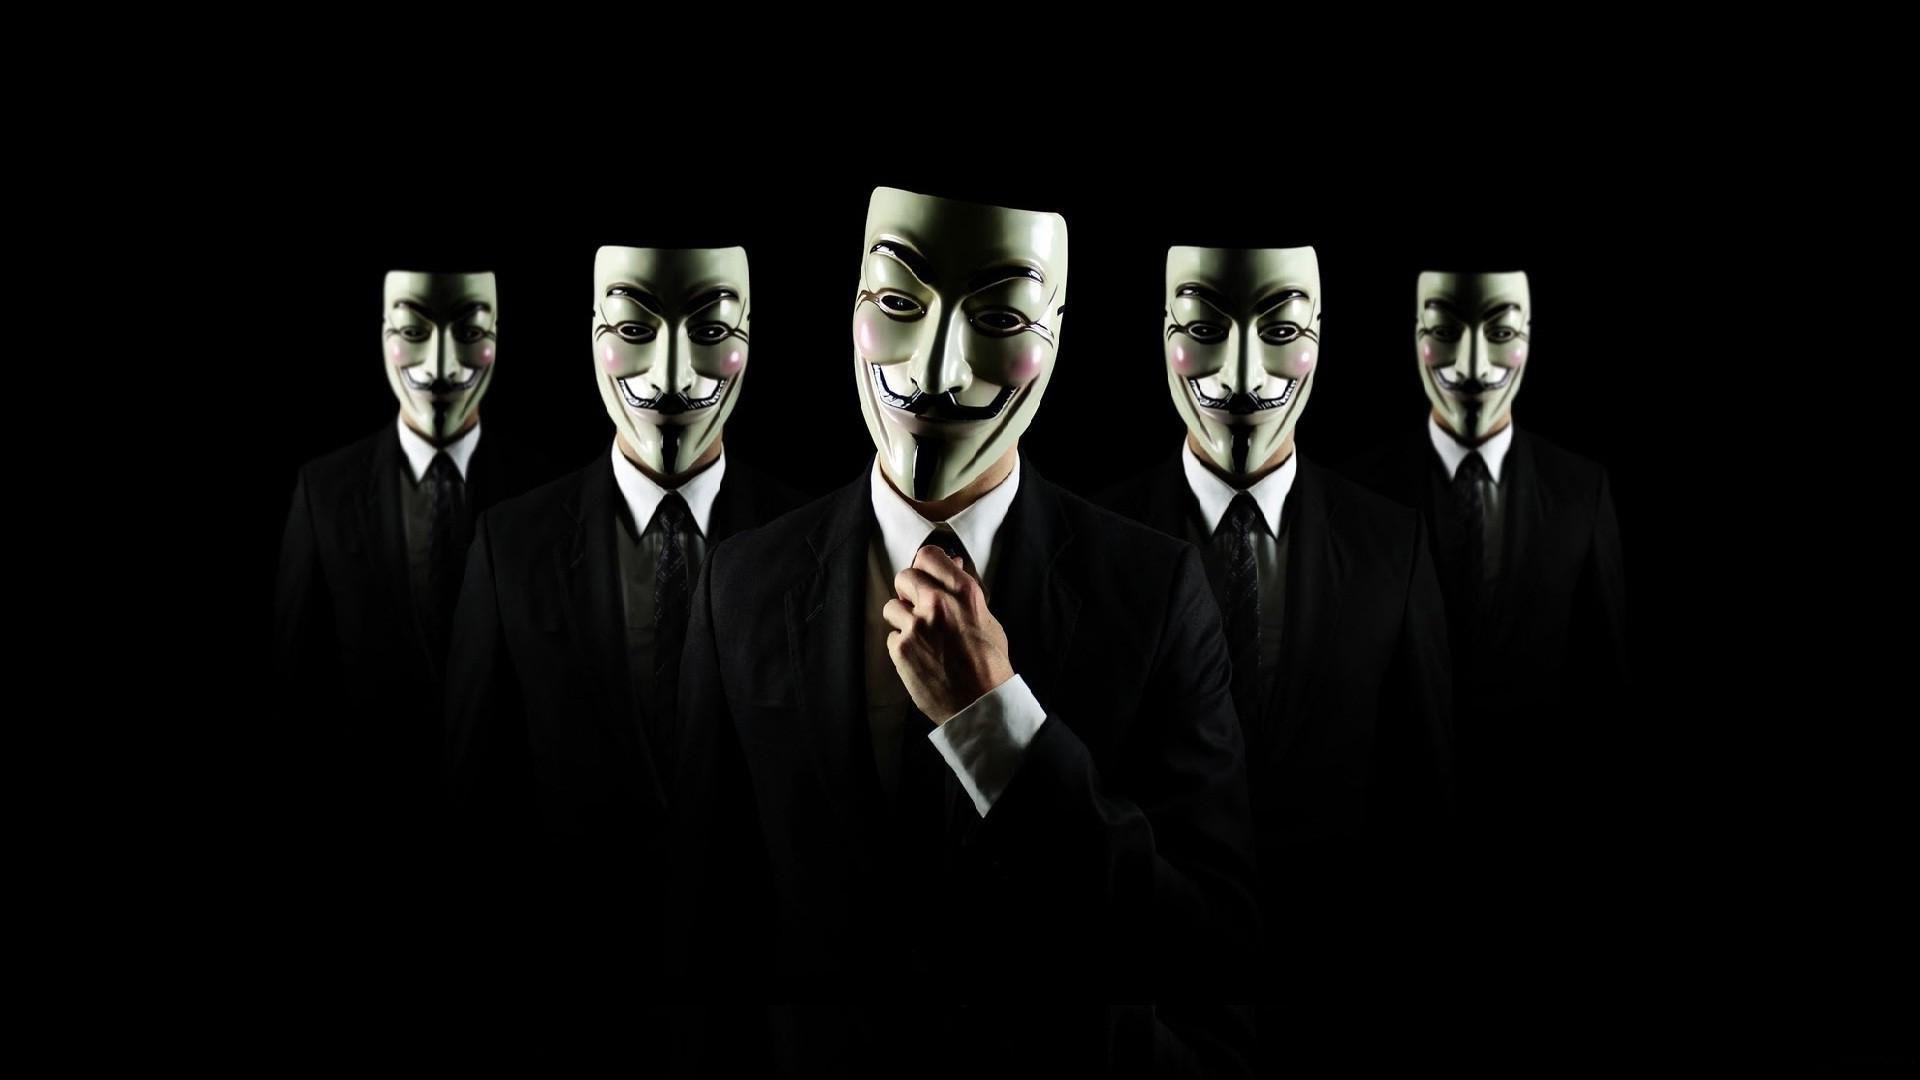 V for Vendetta HD Wallpaper, HD Wallpaper available in different